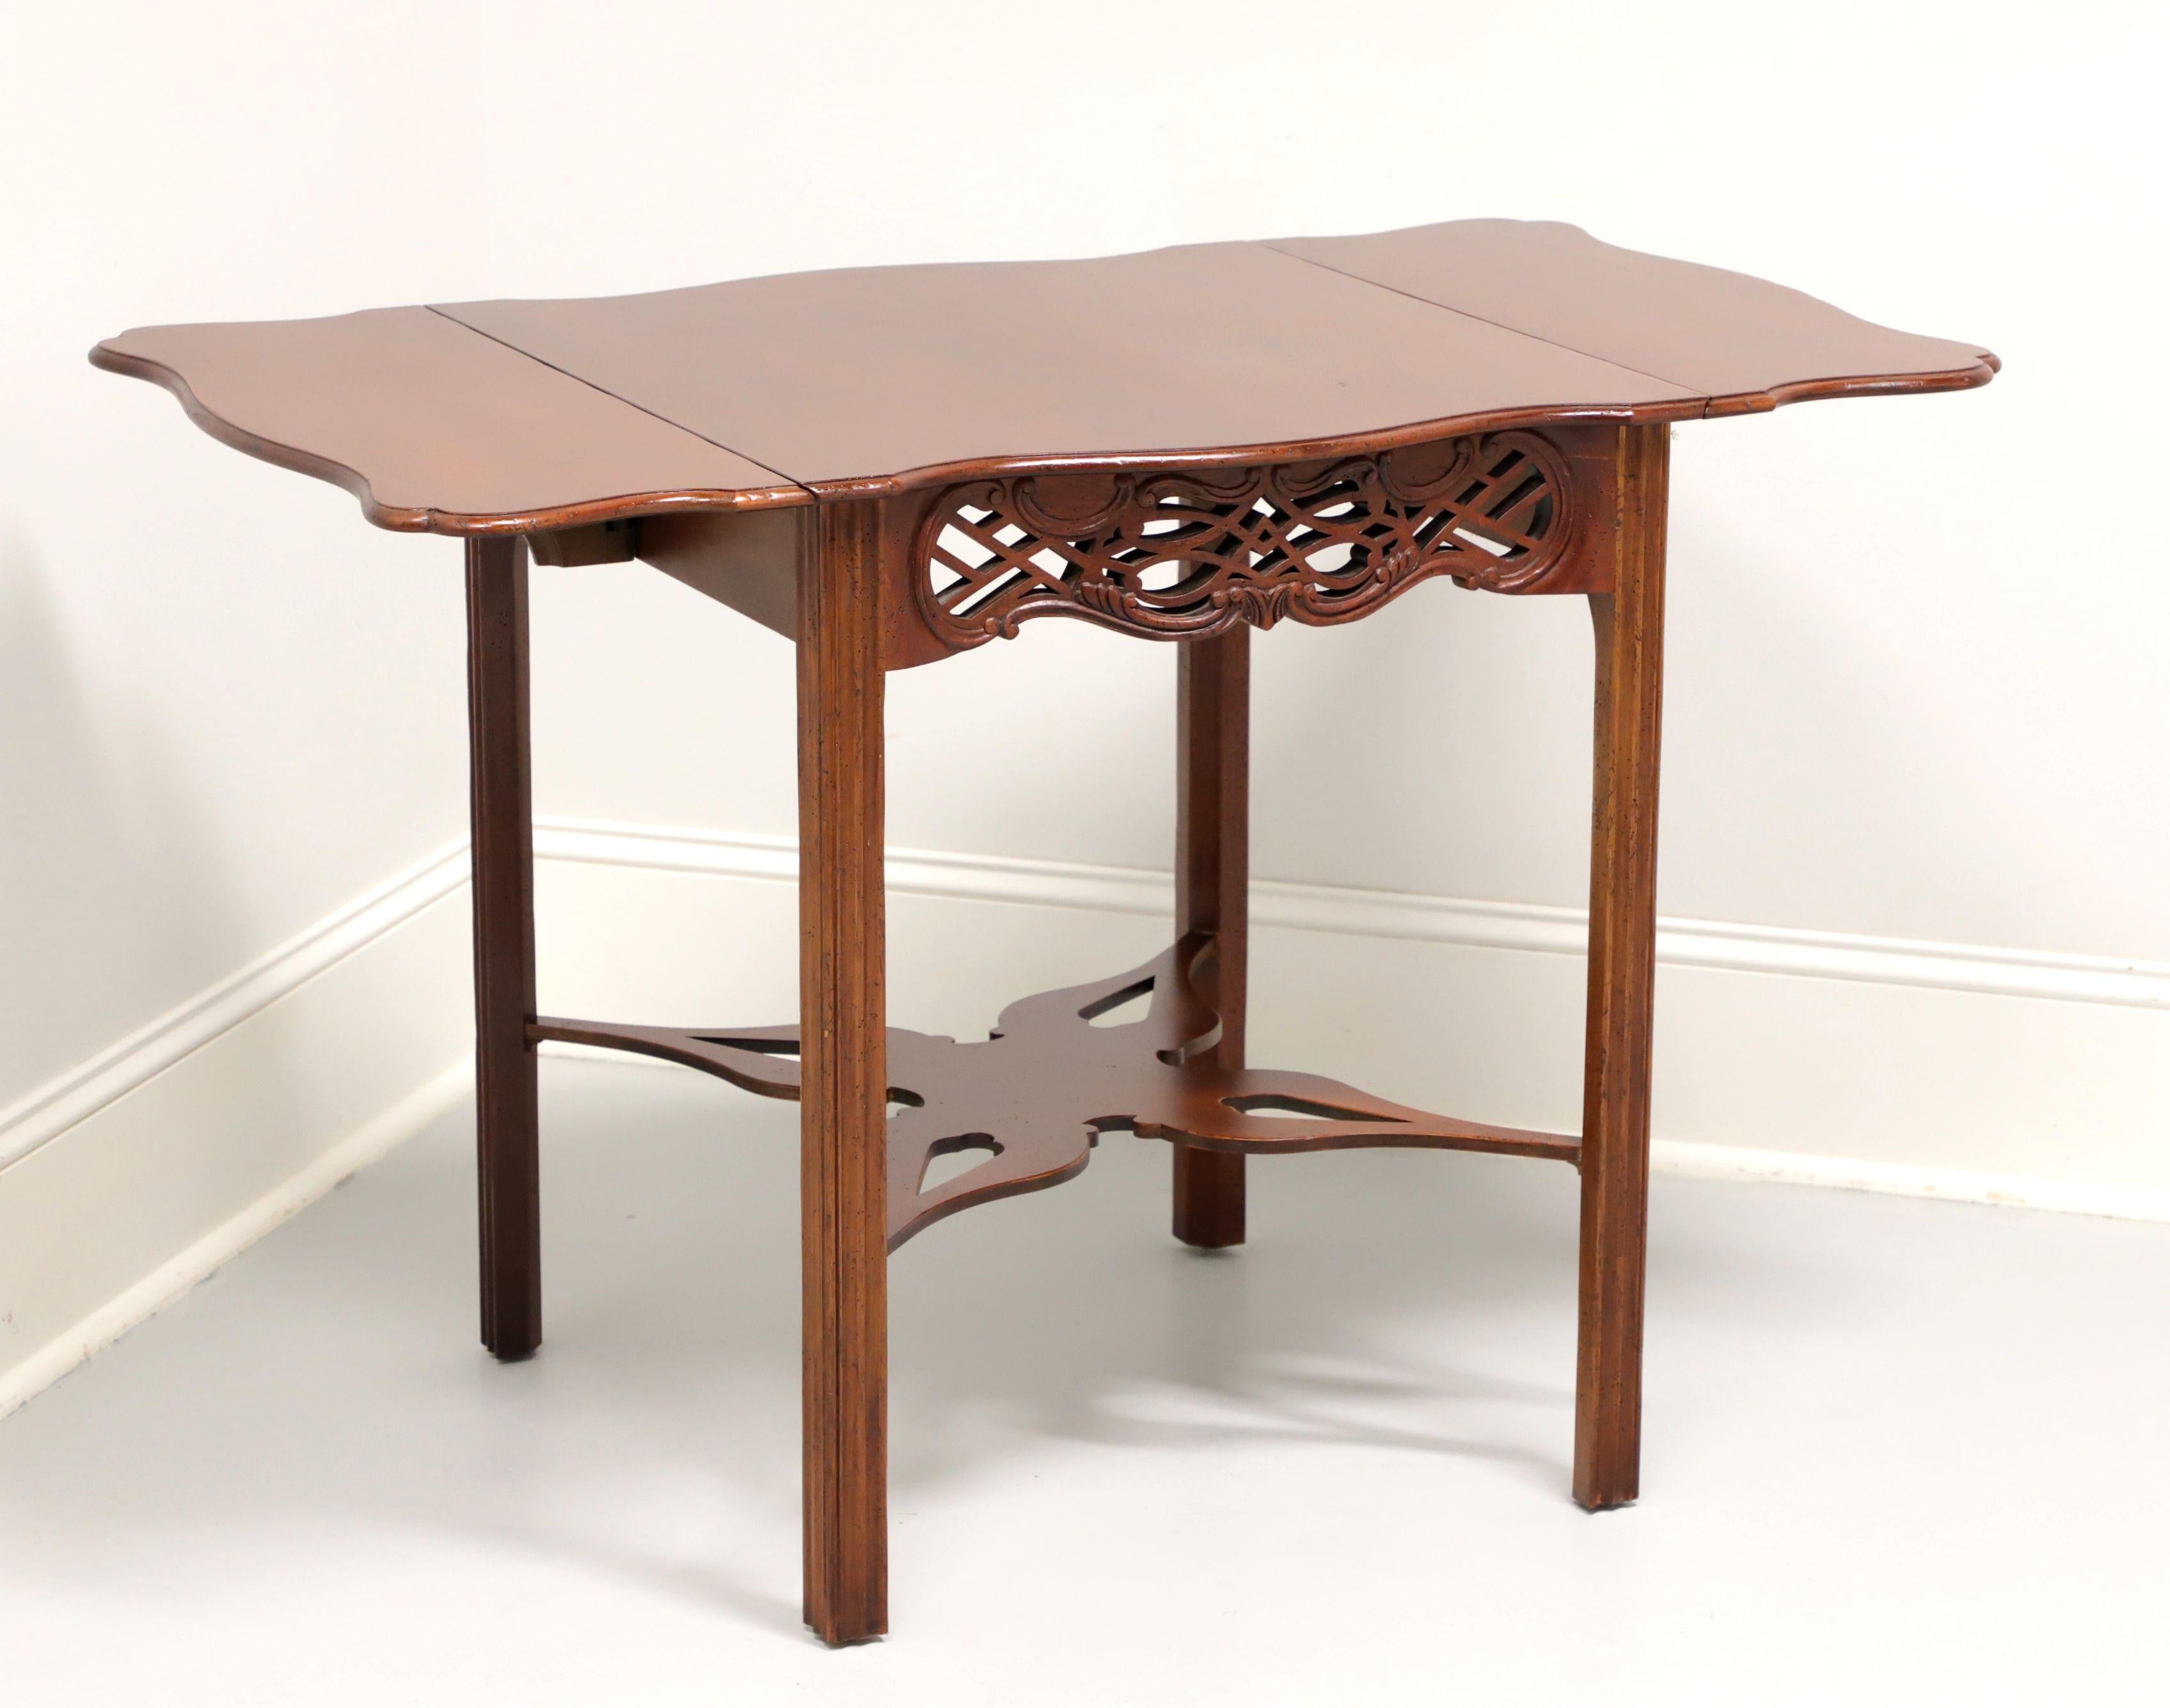 A Georgian style Pembroke table by Baker Furniture, from their Historic Charleston Reproductions Collection. Solid mahogany with a distressed finish, drop leaves, ornately carved apron, butterfly shaped open carved under tier, and fluted straight